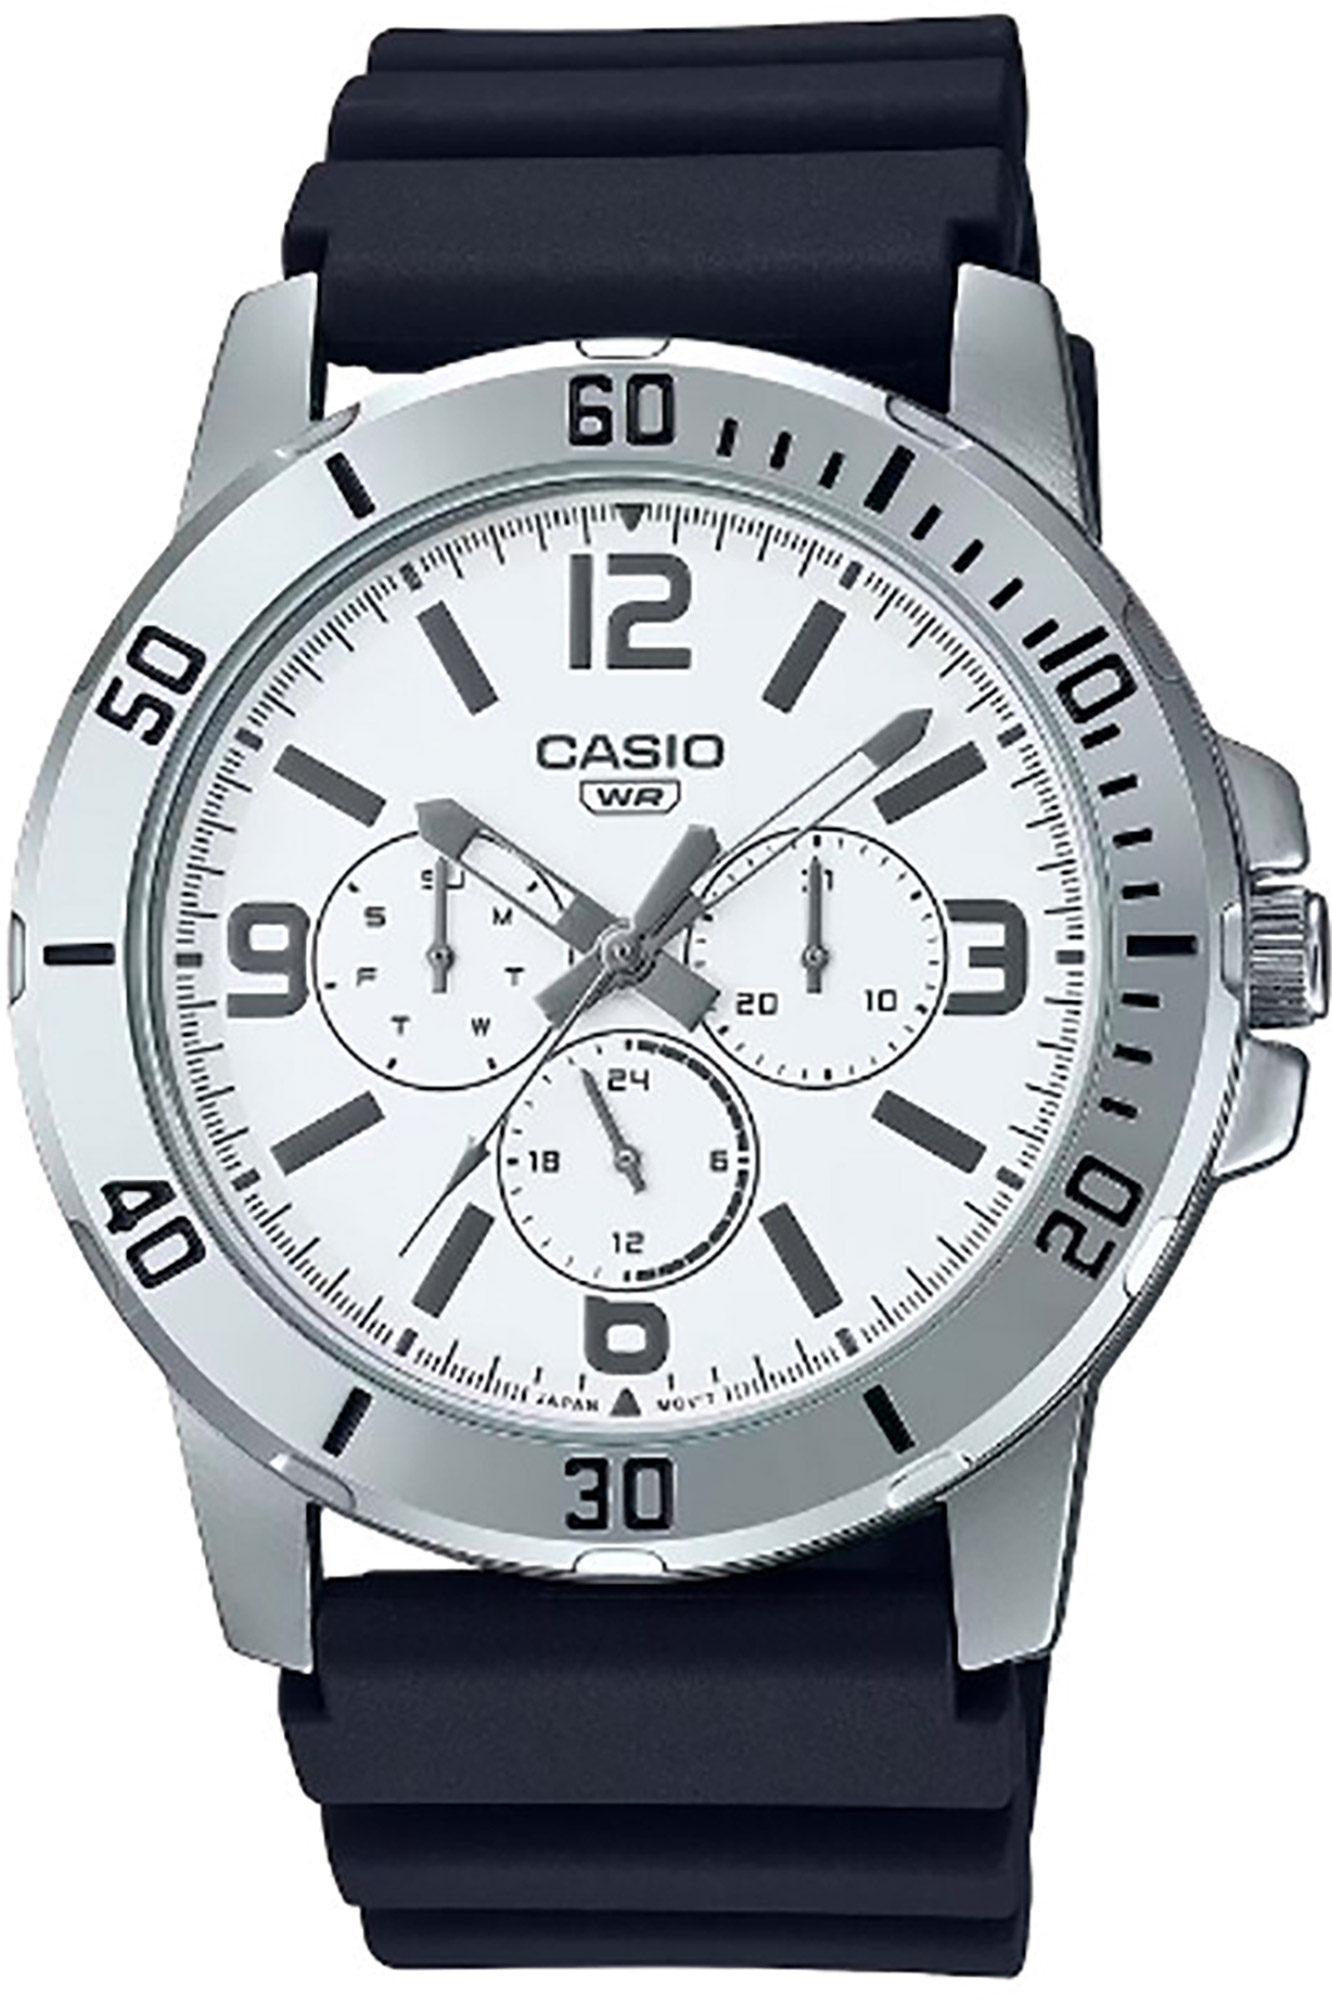 Watch CASIO Collection mtp-vd300-7b